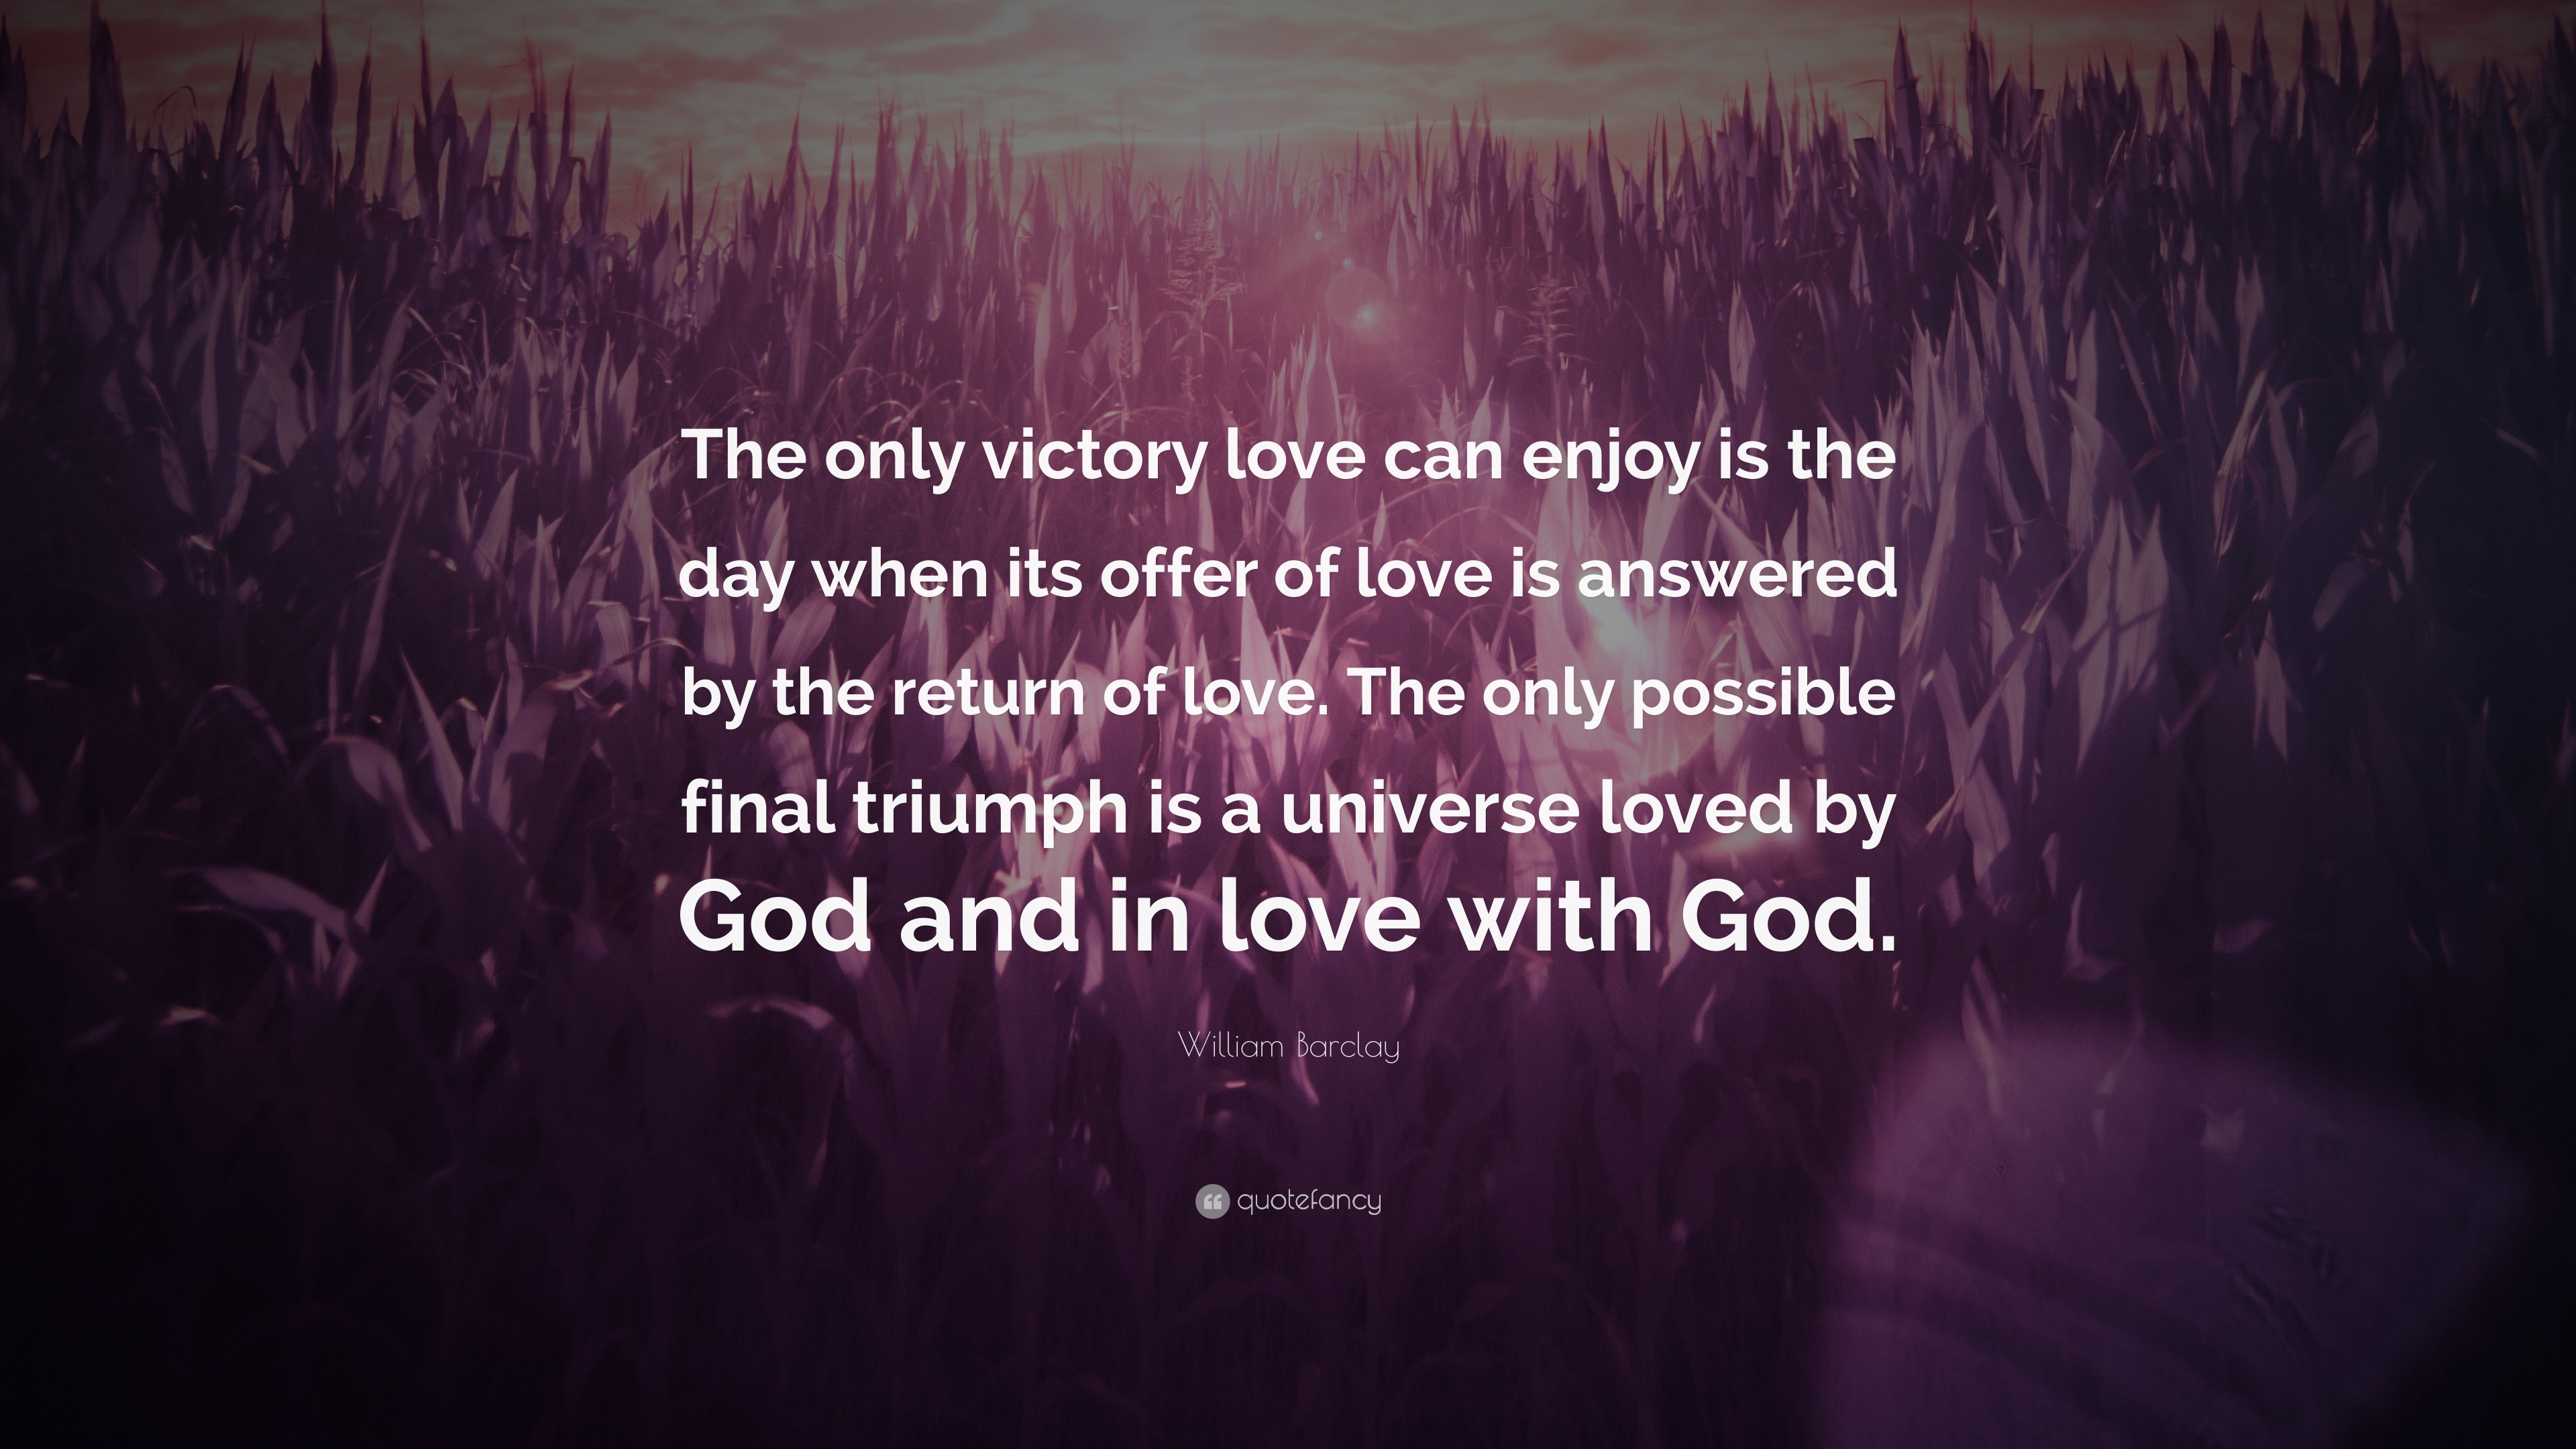 842985-William-Barclay-Quote-The-only-victory-love-can-enjoy-is-the-day.jpg